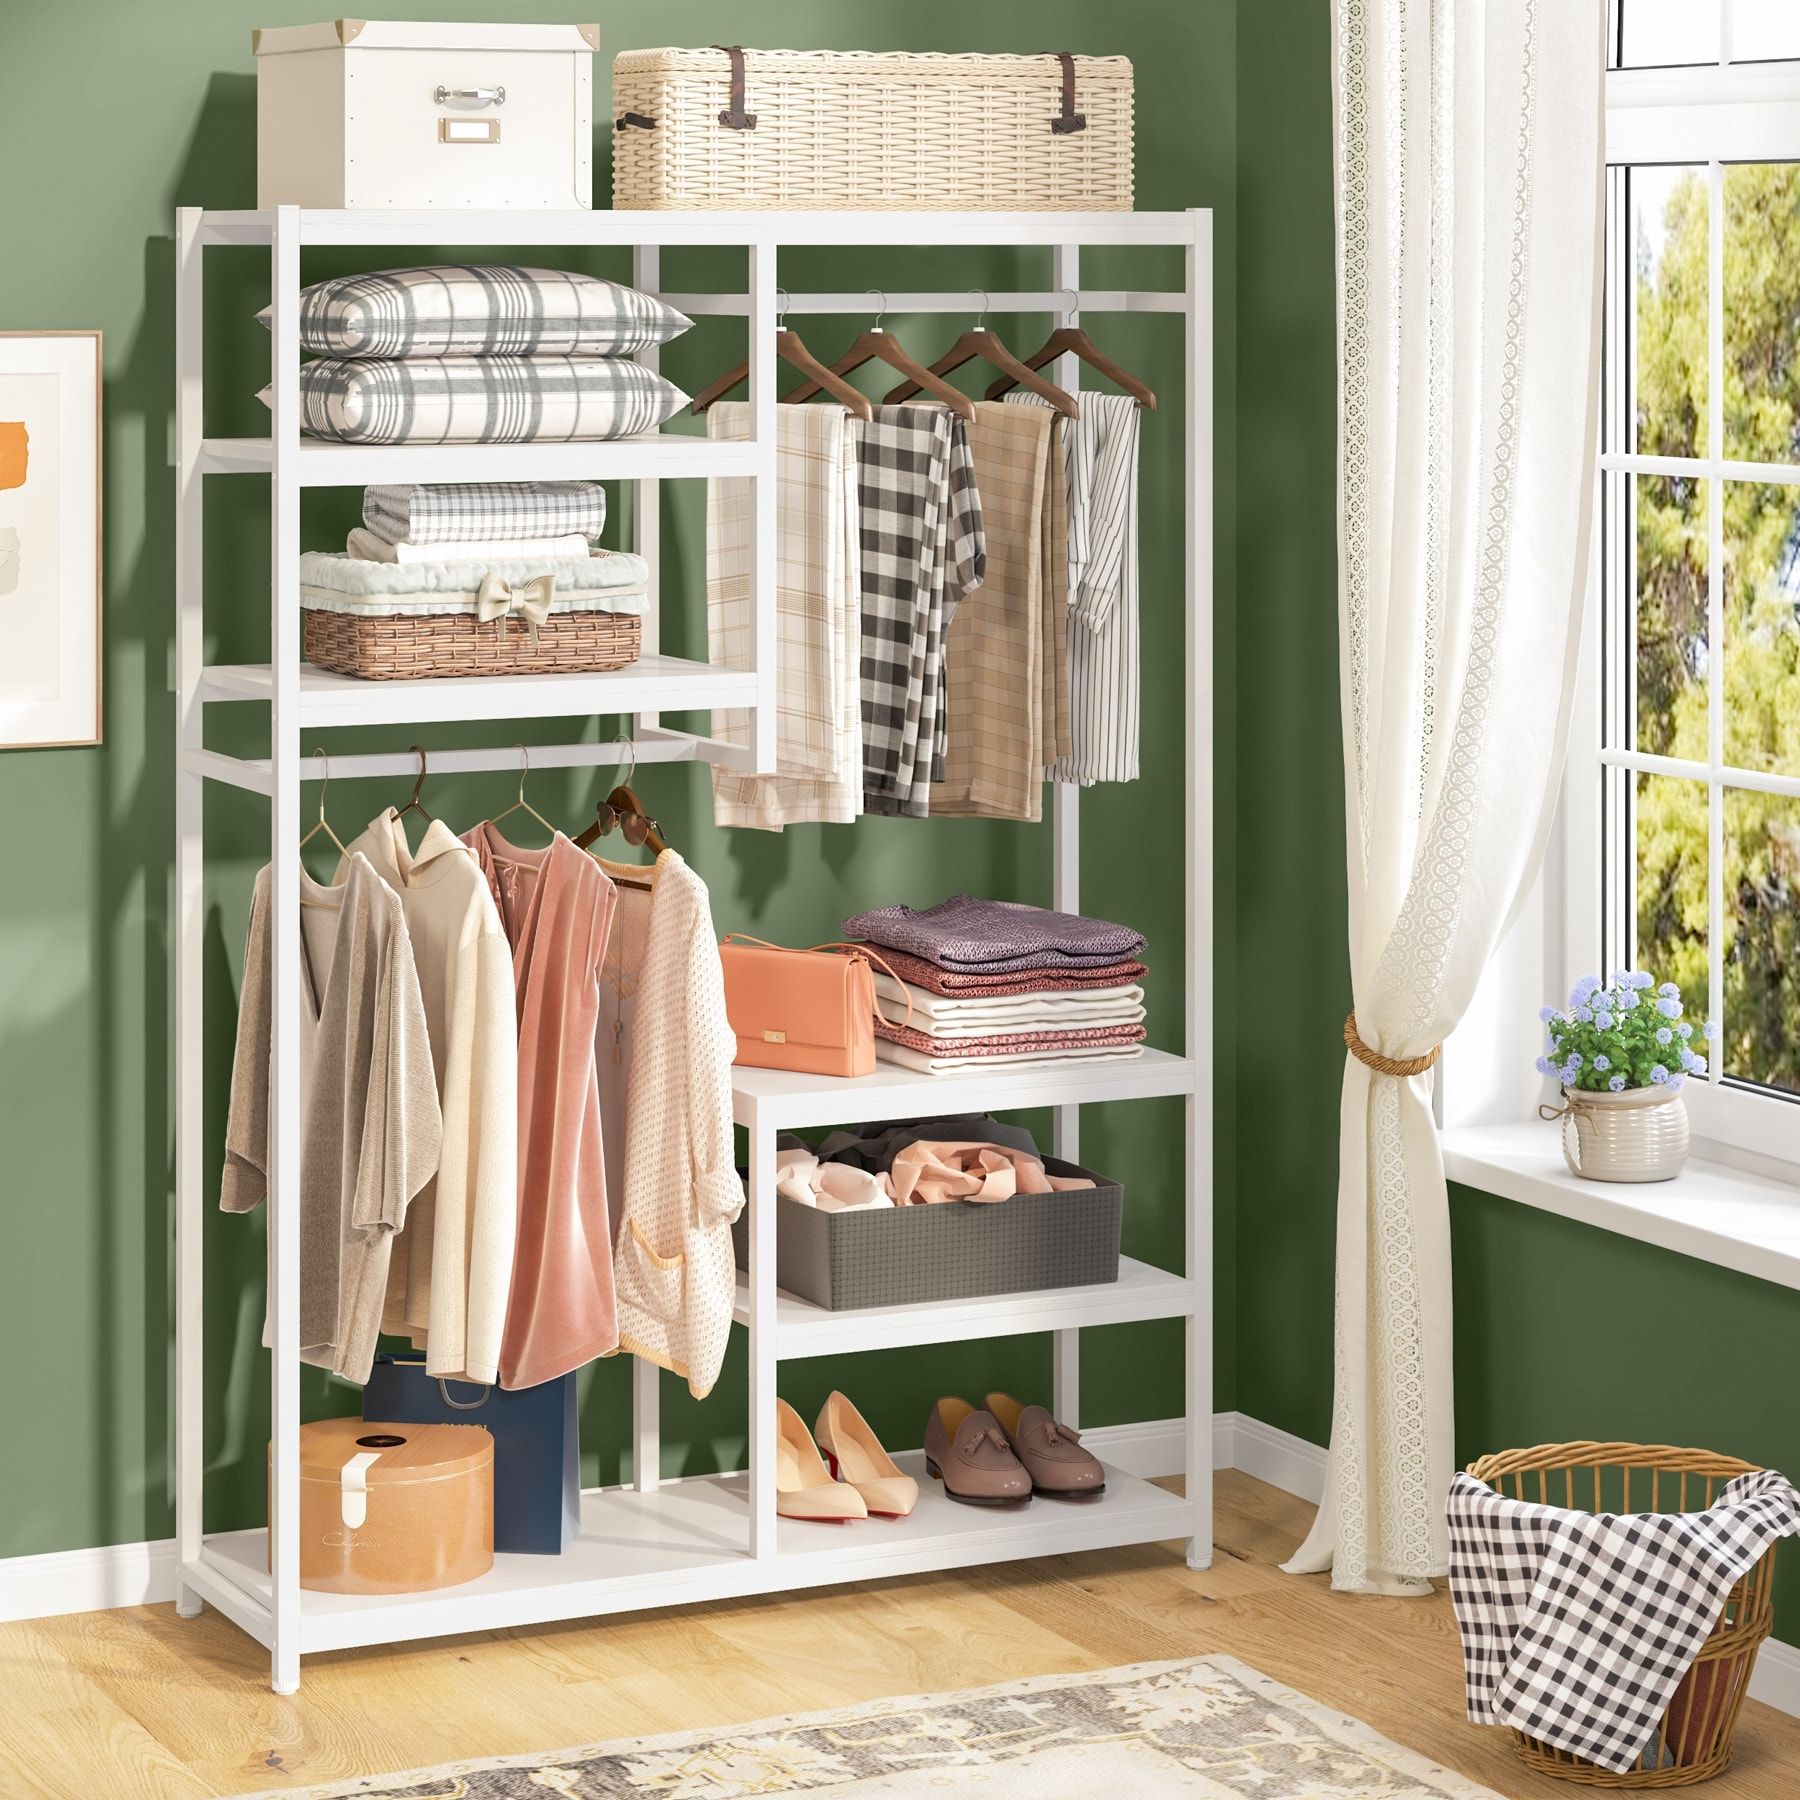 Free Standing Closet Organizer Double Hanging Rod Clothes Garment Racks –  Bed Bath & Beyond – 30537676 Intended For Well Known Clothes Organizer Wardrobes (View 9 of 10)